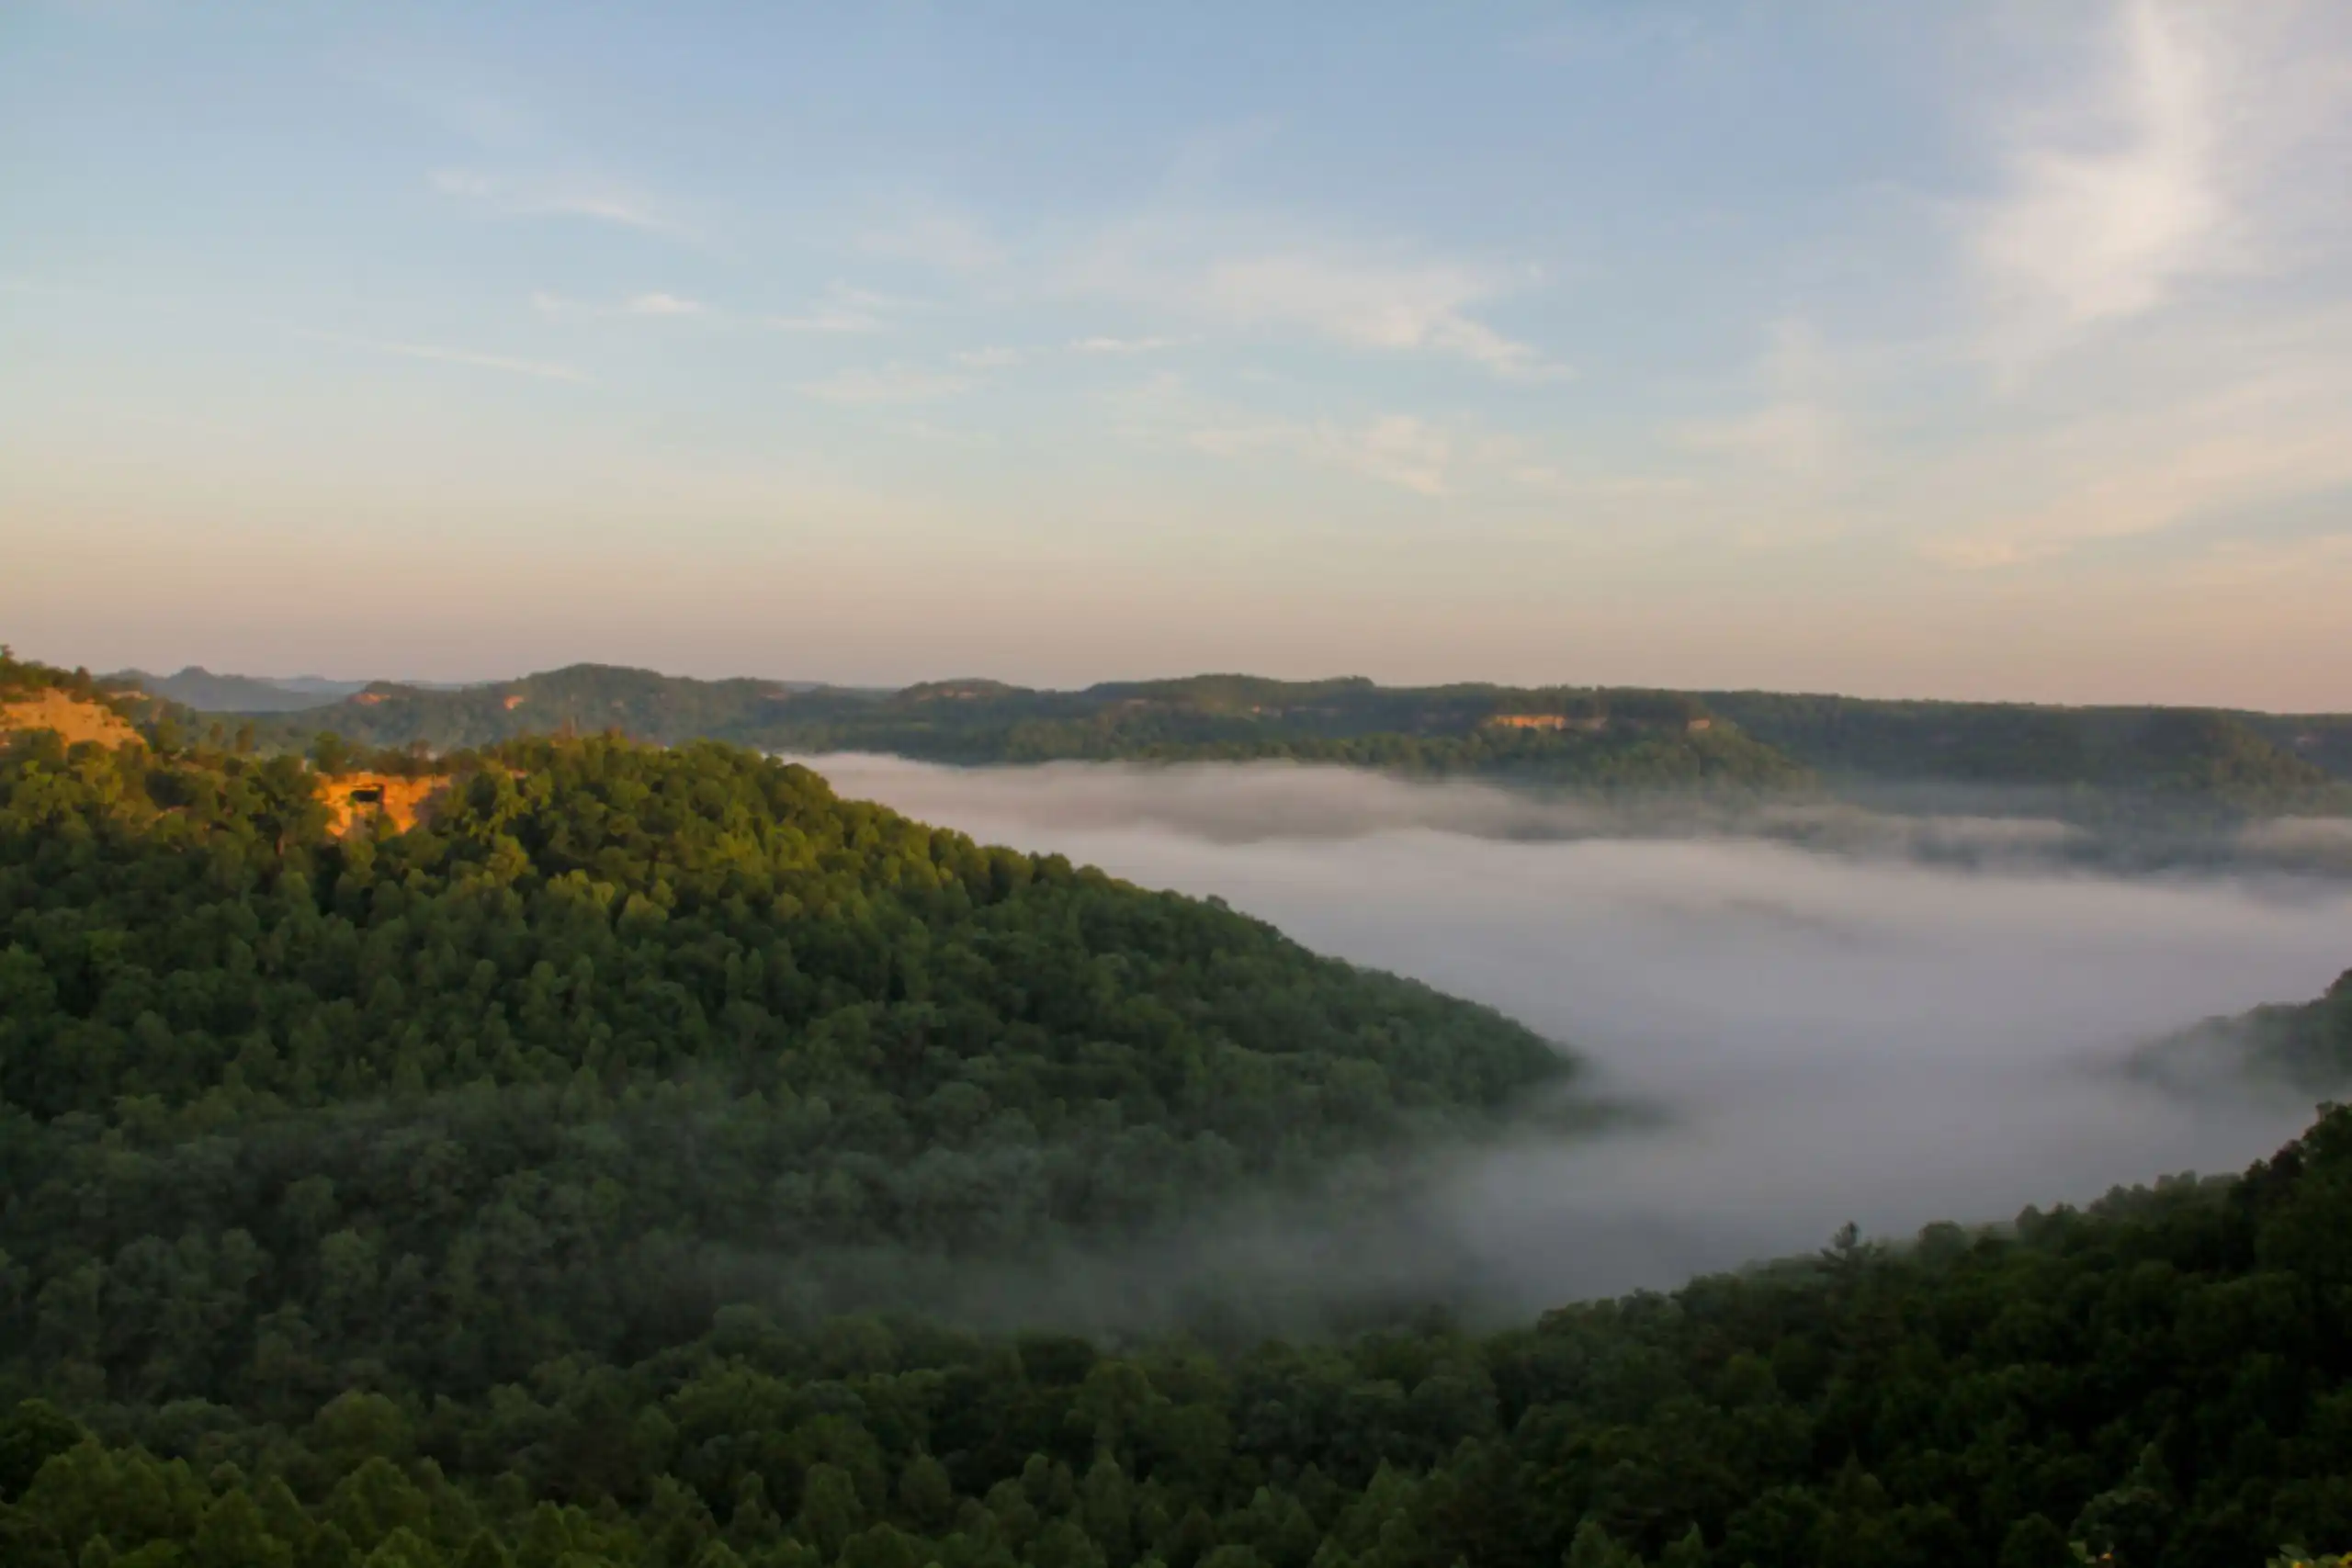 Leave the road and take the best hiking trails in Kentucky